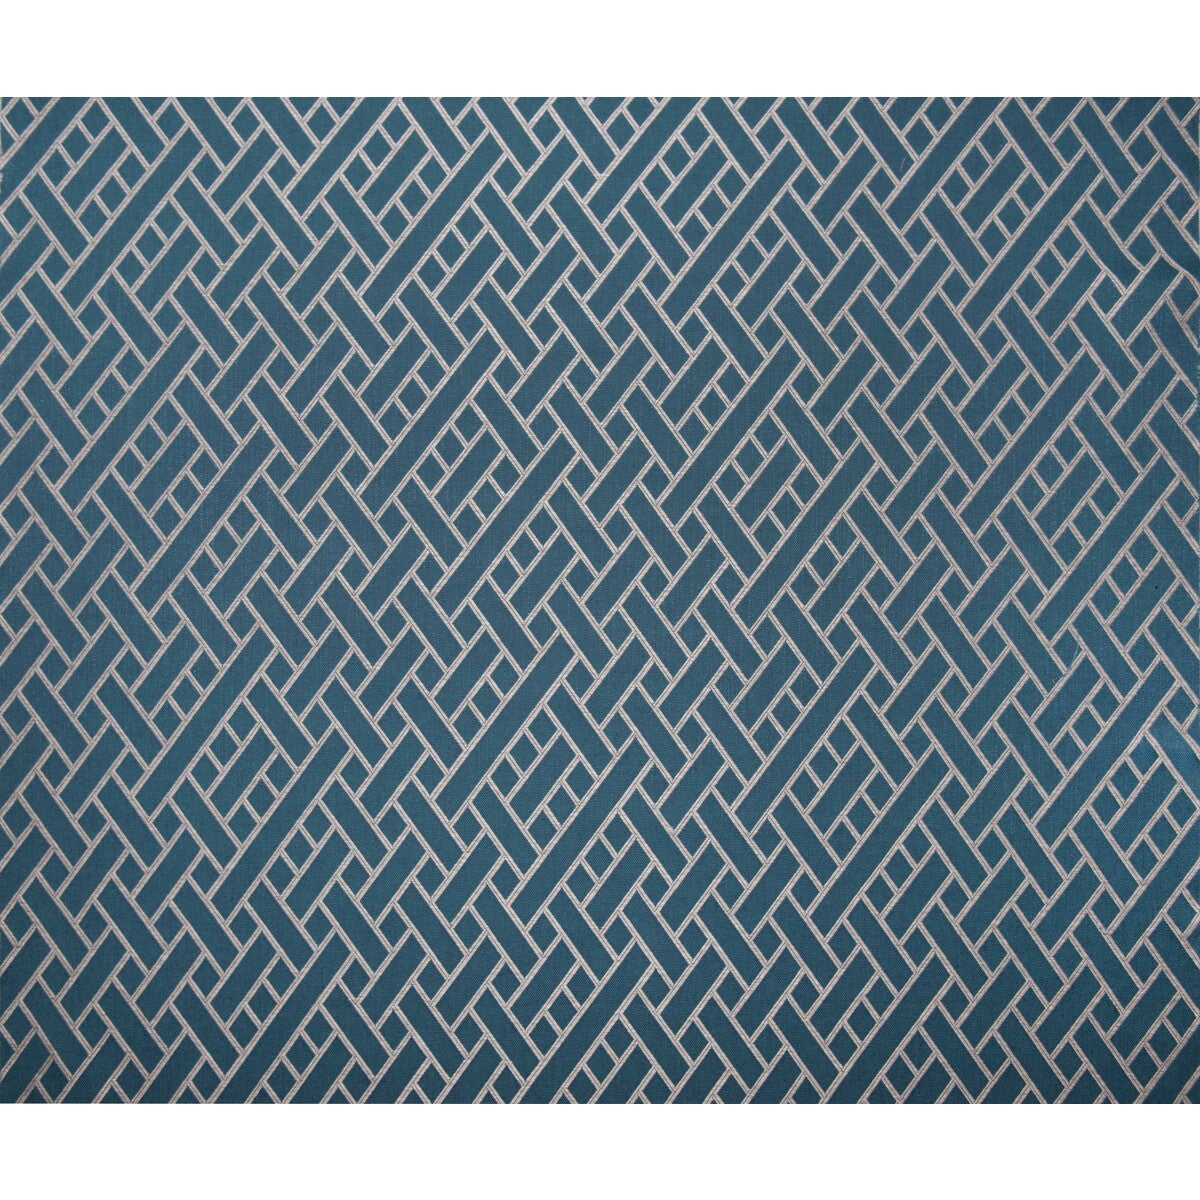 Nairobi fabric in oceano color - pattern GDT5374.8.0 - by Gaston y Daniela in the Gaston Africalia collection